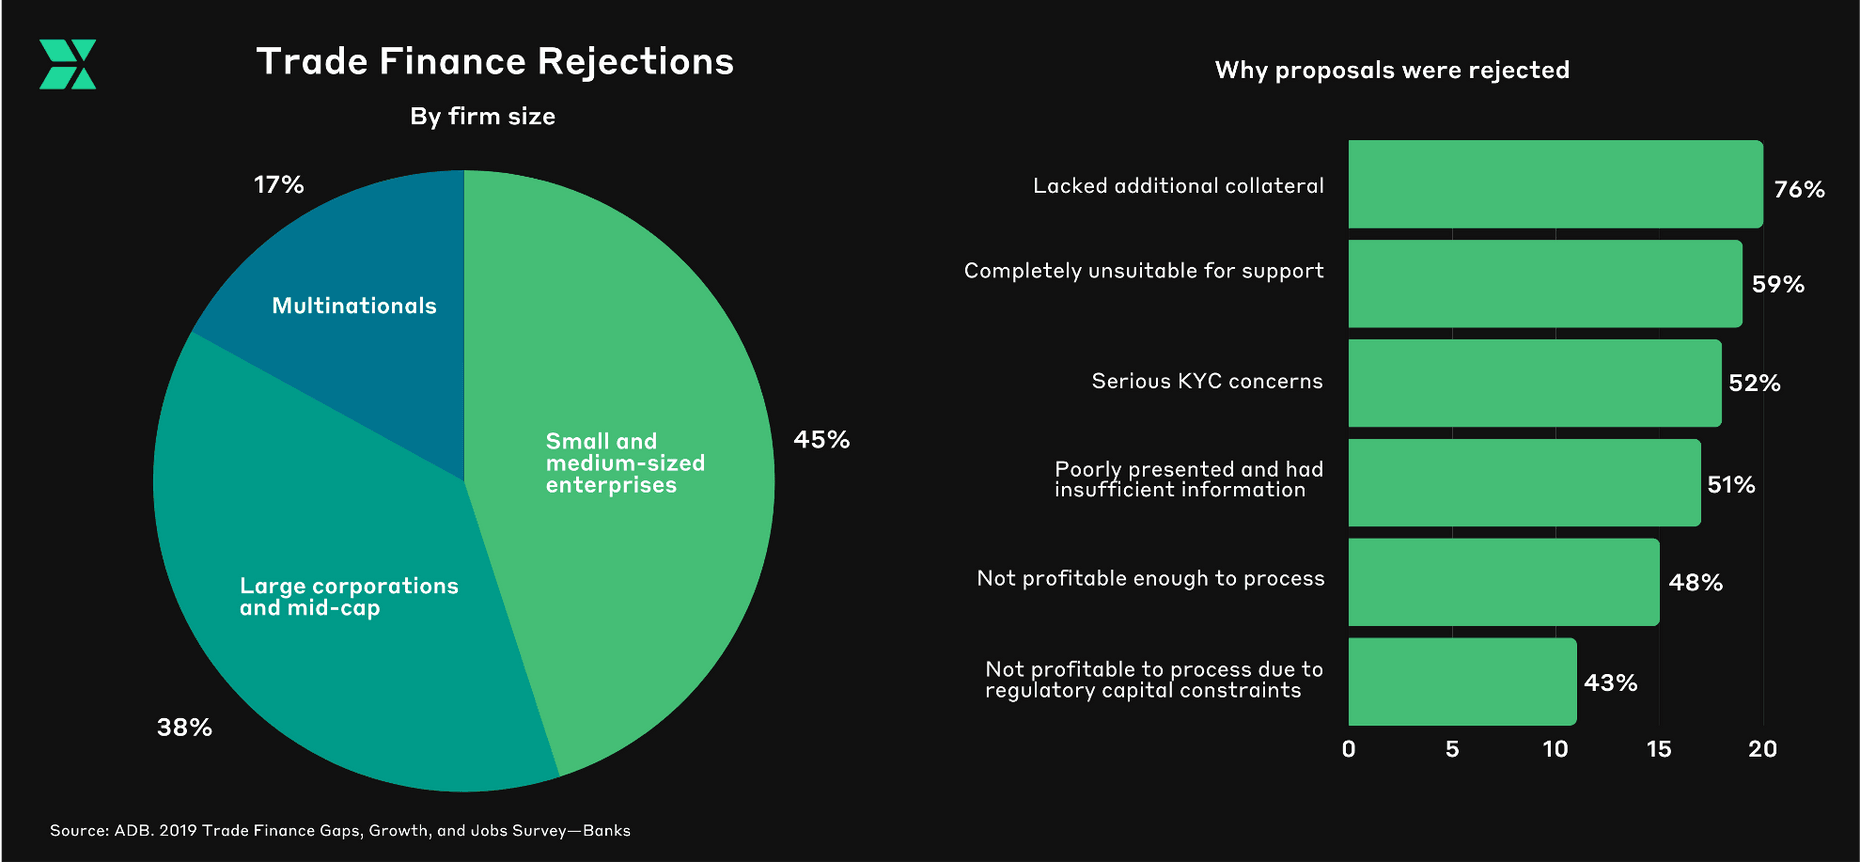 Trade Finance Rejections